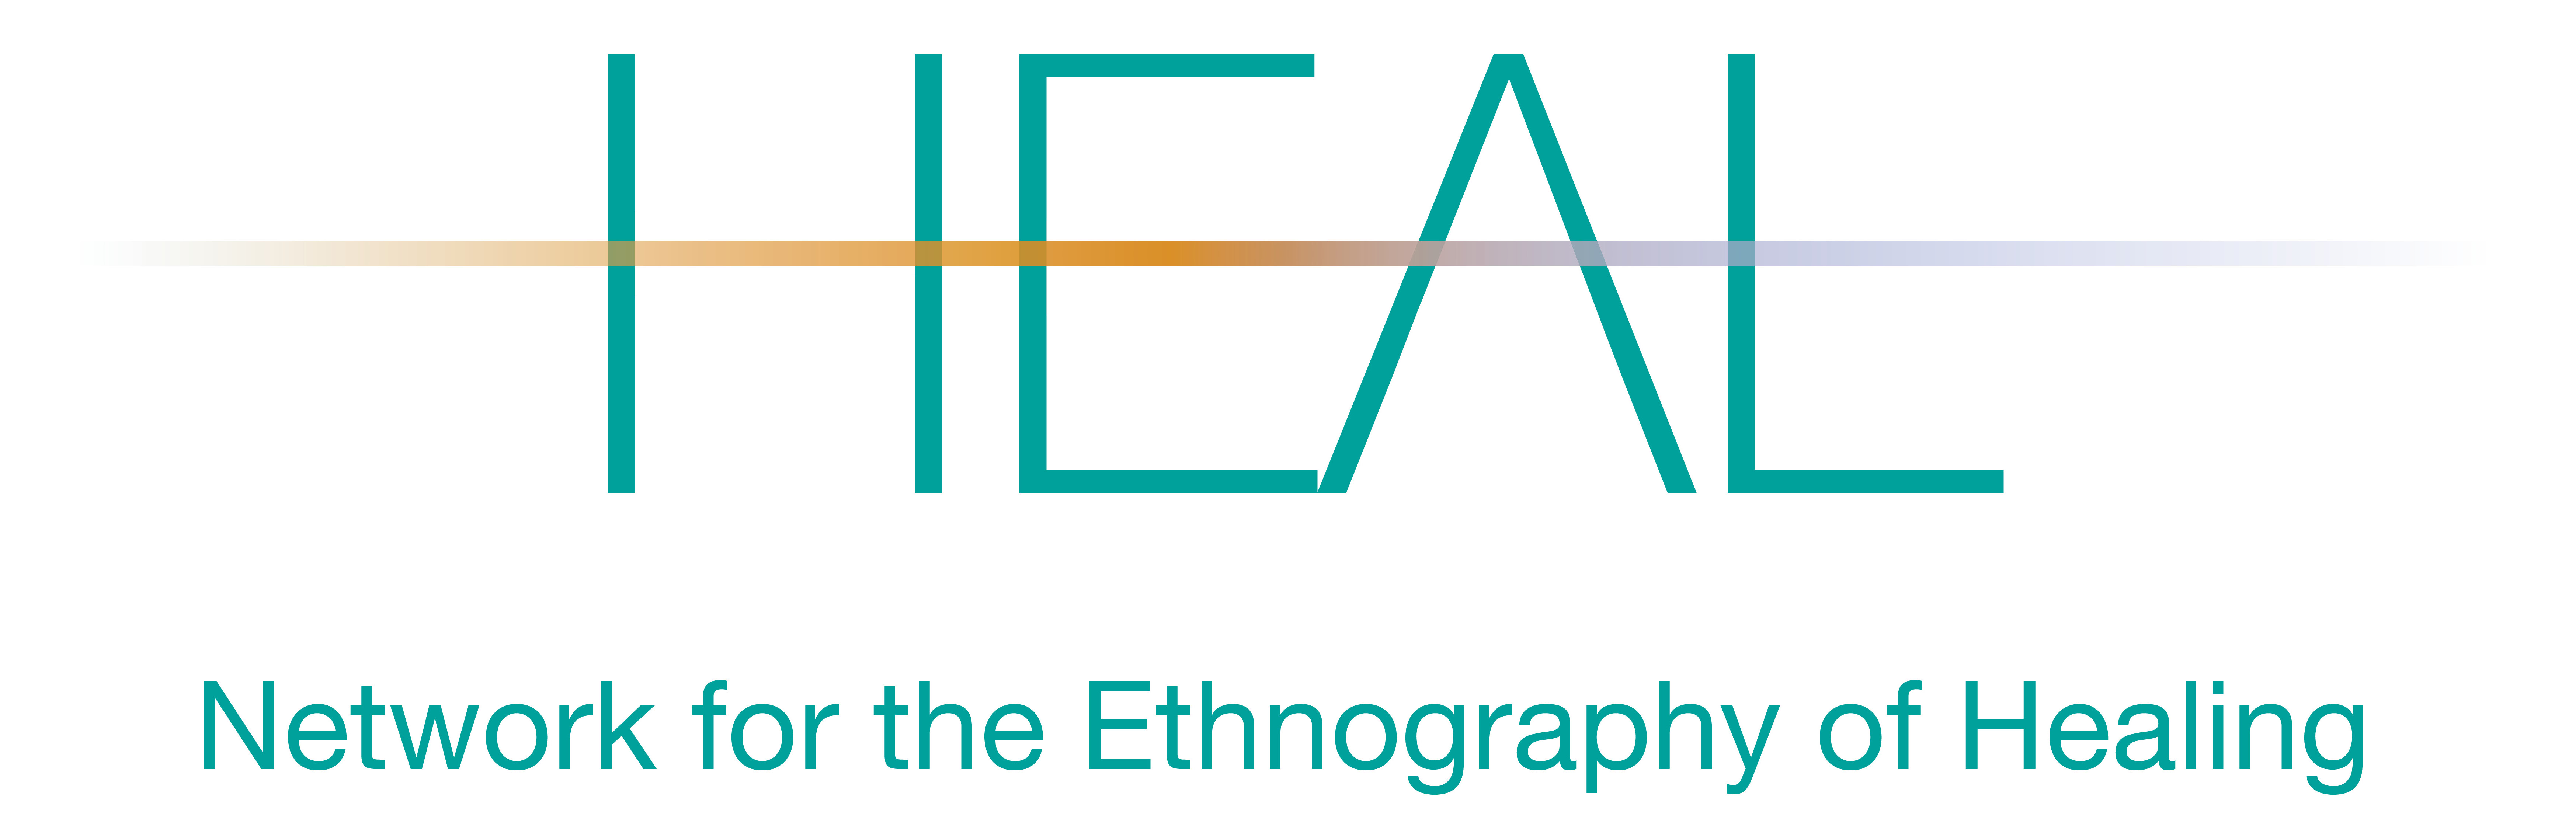 HEAL Network for the Ethnography of Healing